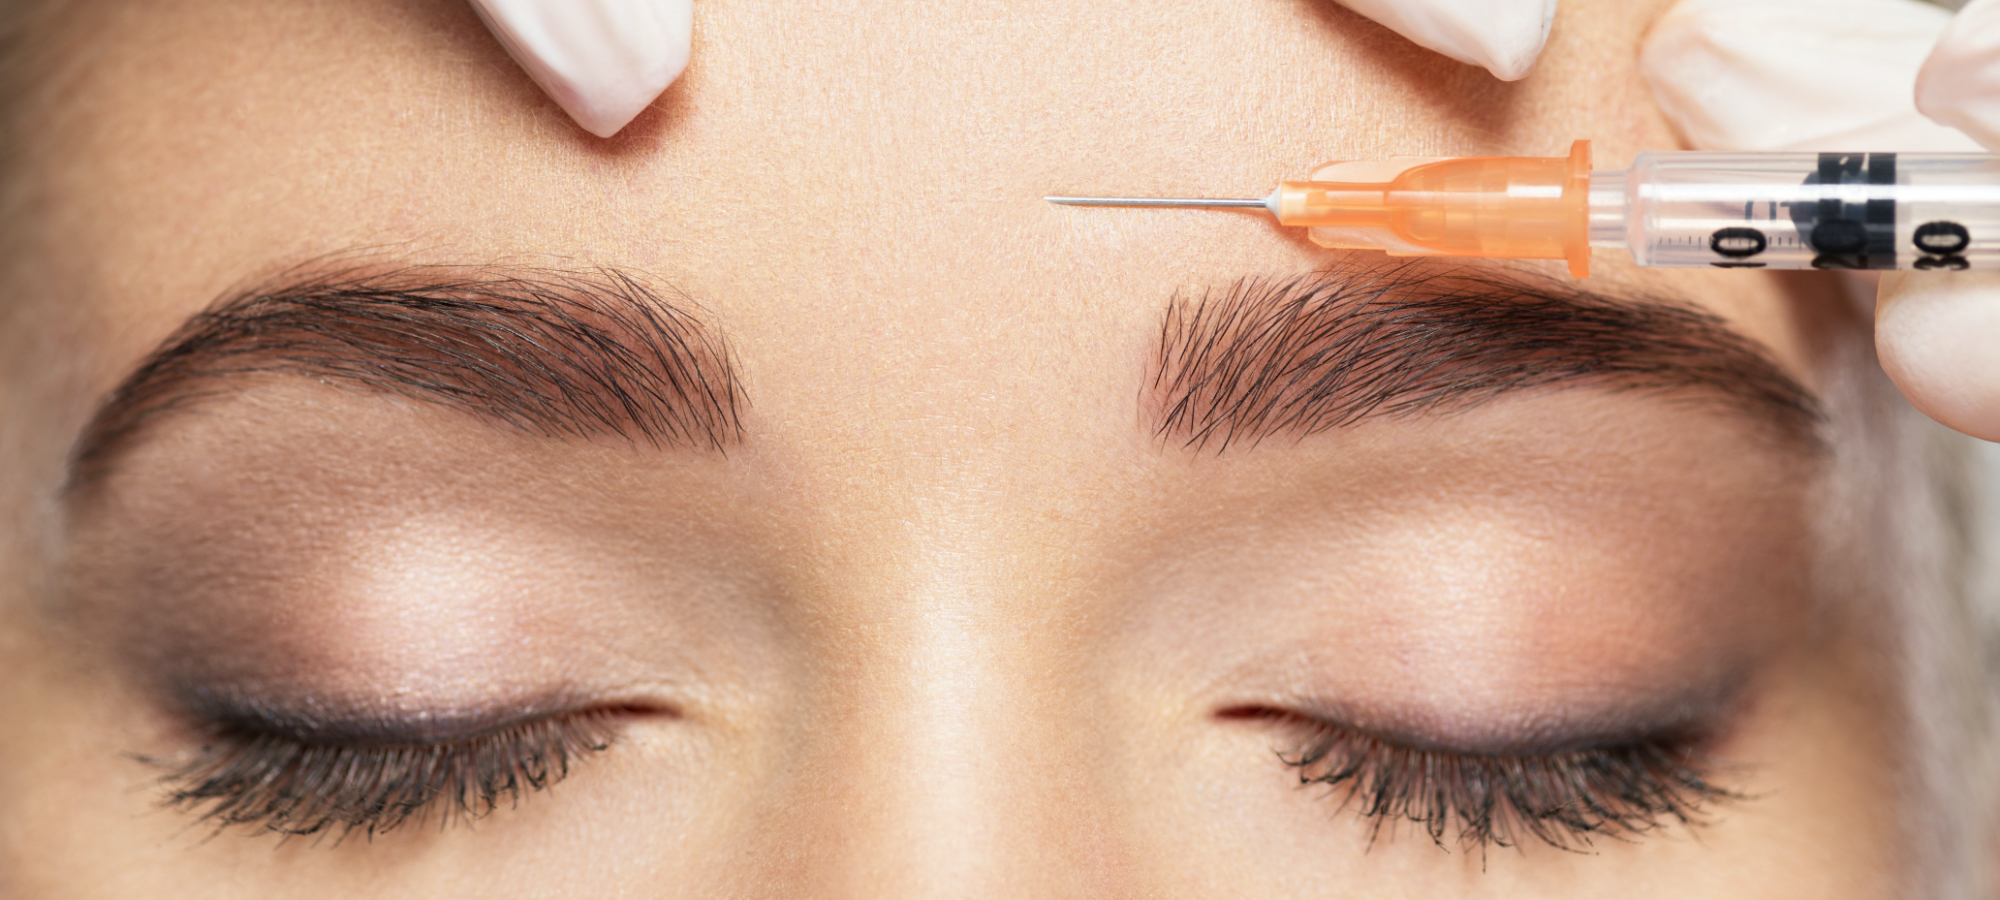 Photo of a woman getting an injectable treatment in her frown line area